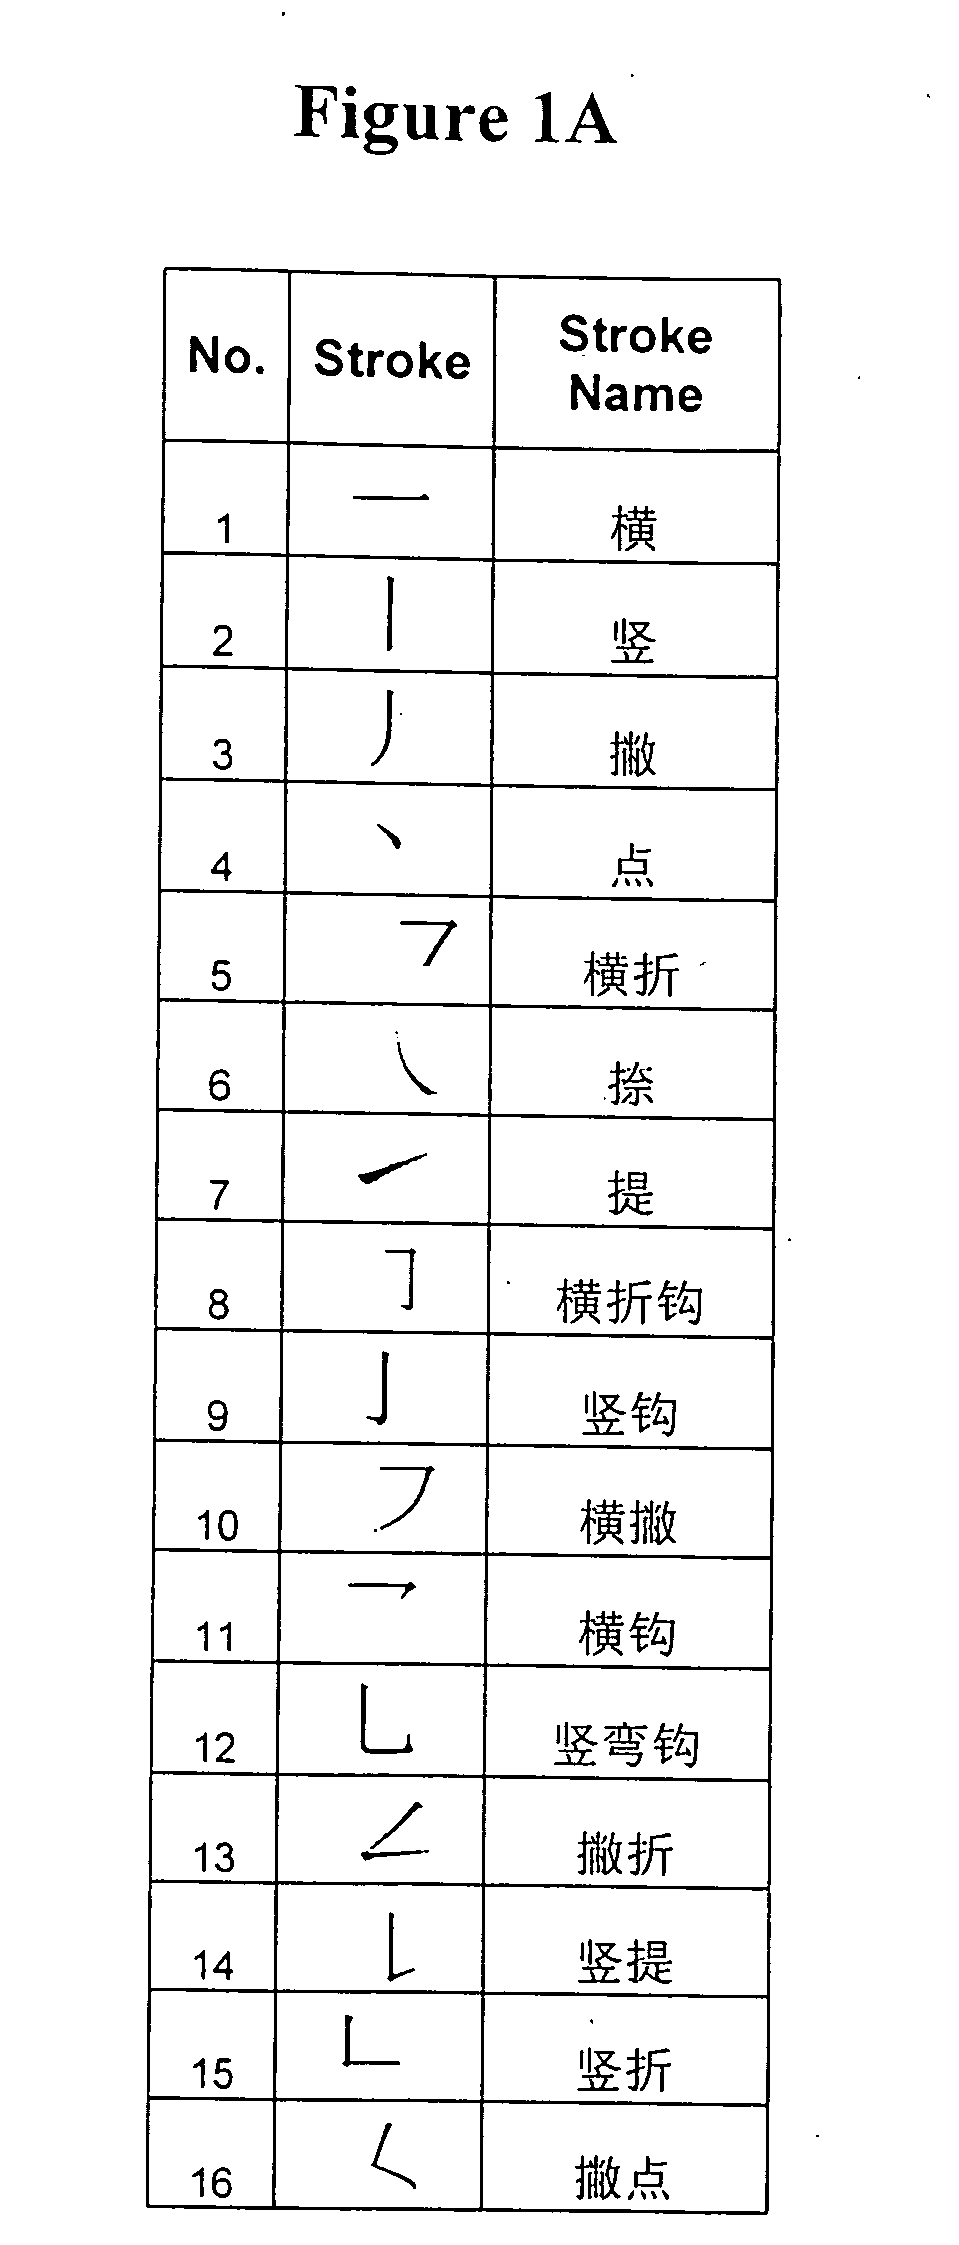 Method of organizing chinese characters